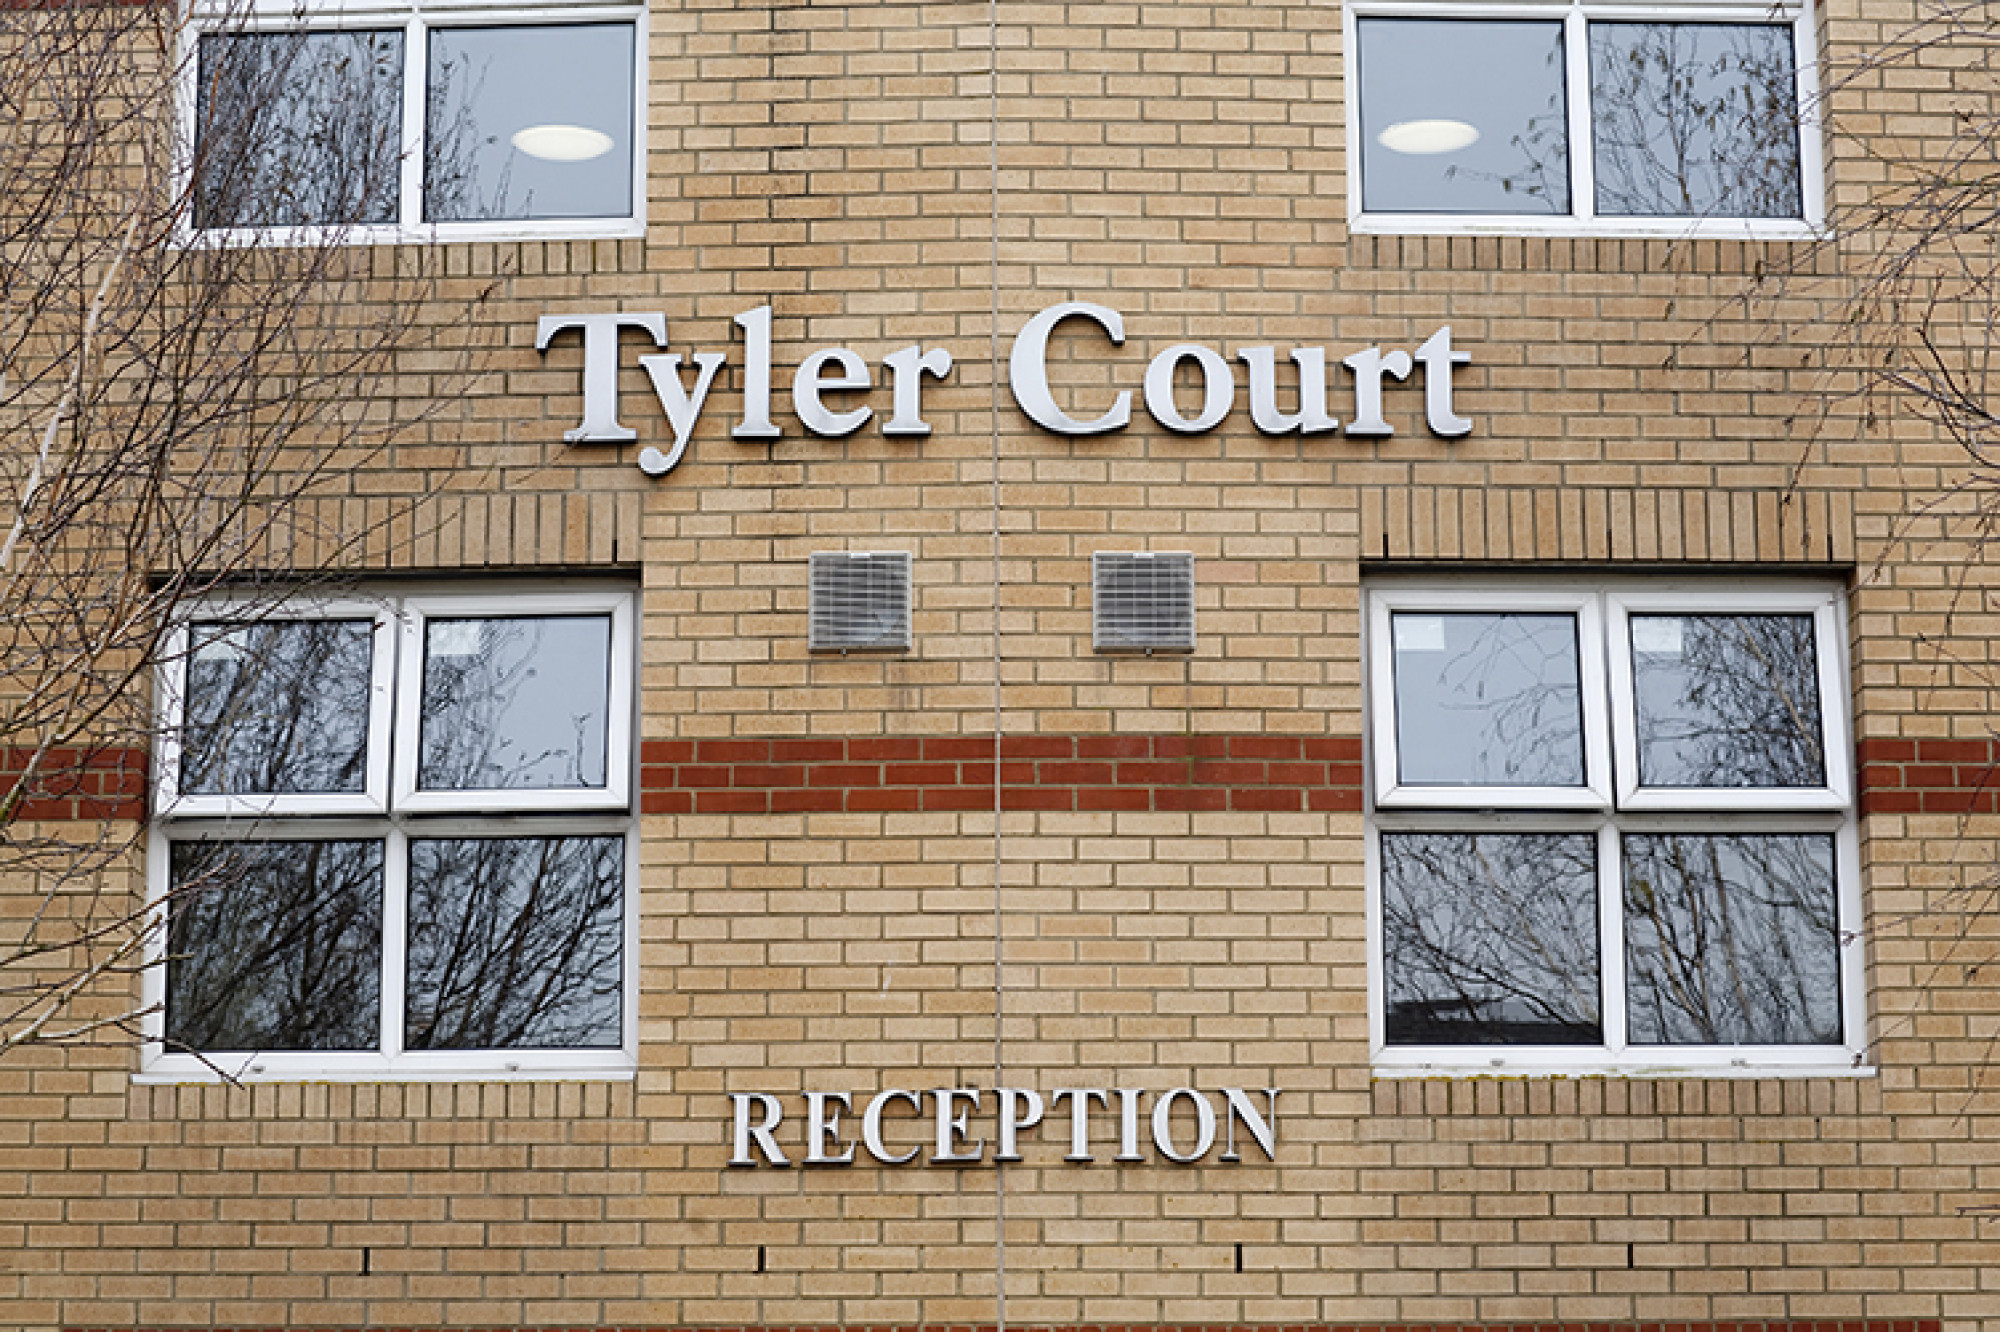 Tyler Court external wall with sign for reception